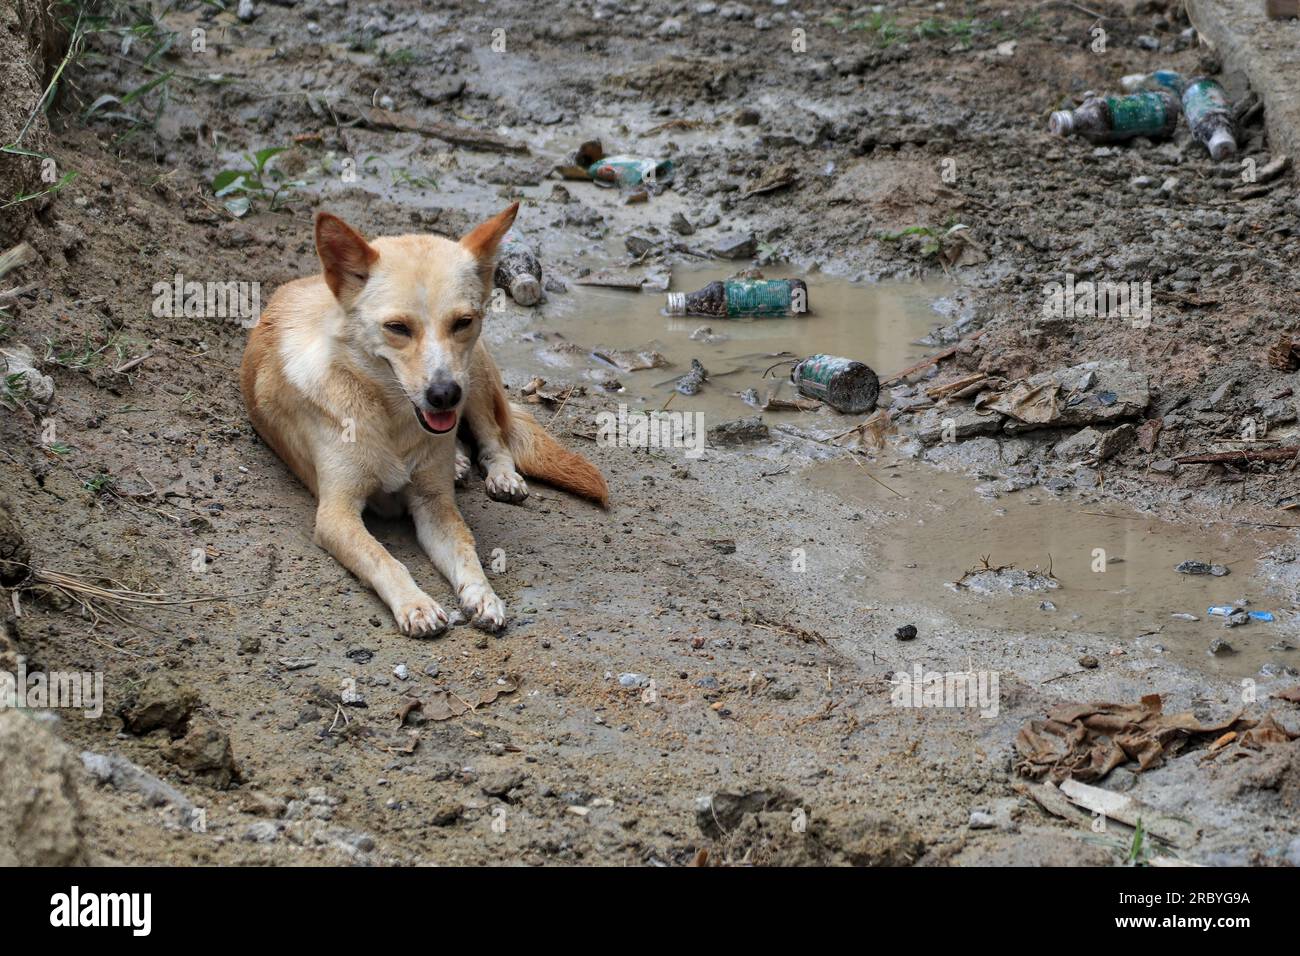 The dog lies in a puddle of water to cool off. Stock Photo